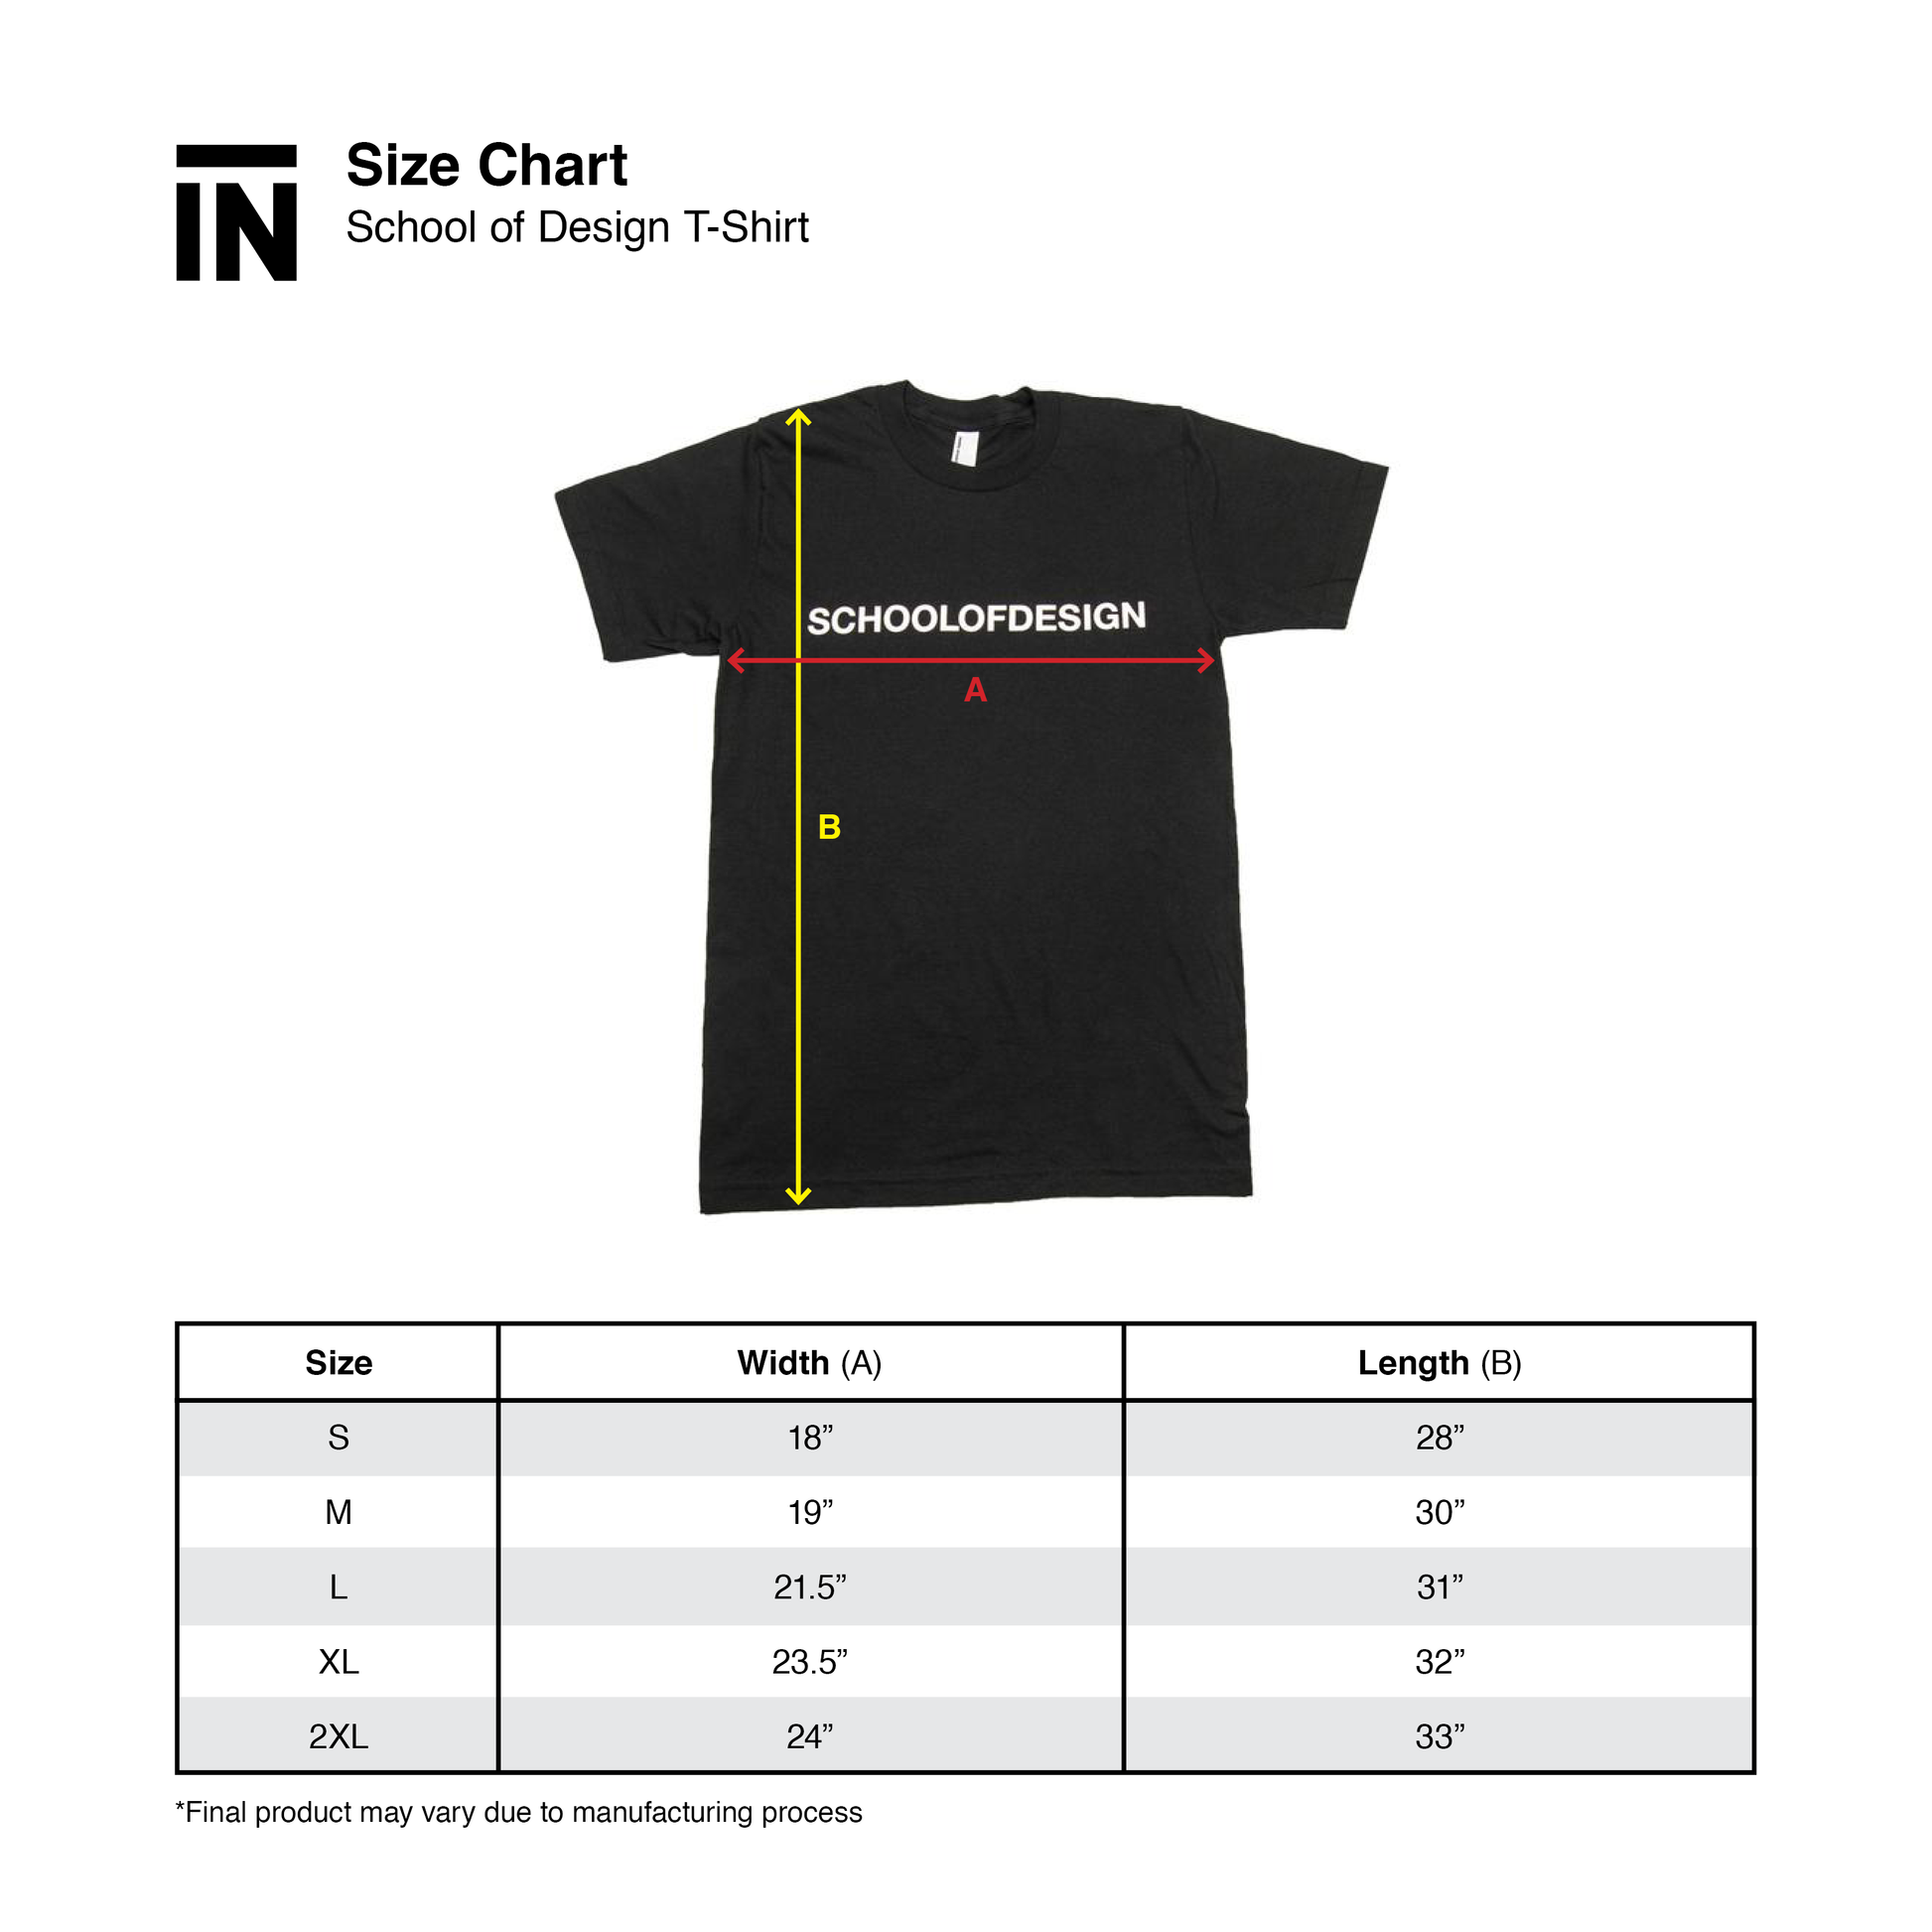 Size chart for SOD T-Shirt. Size small: 18" width, 28" length. Medium: 19" width, 30" length. Large: 21.5" width, 31" length. XL: 23.5" width, 32" length. 2XL: 24" width, 33" length.